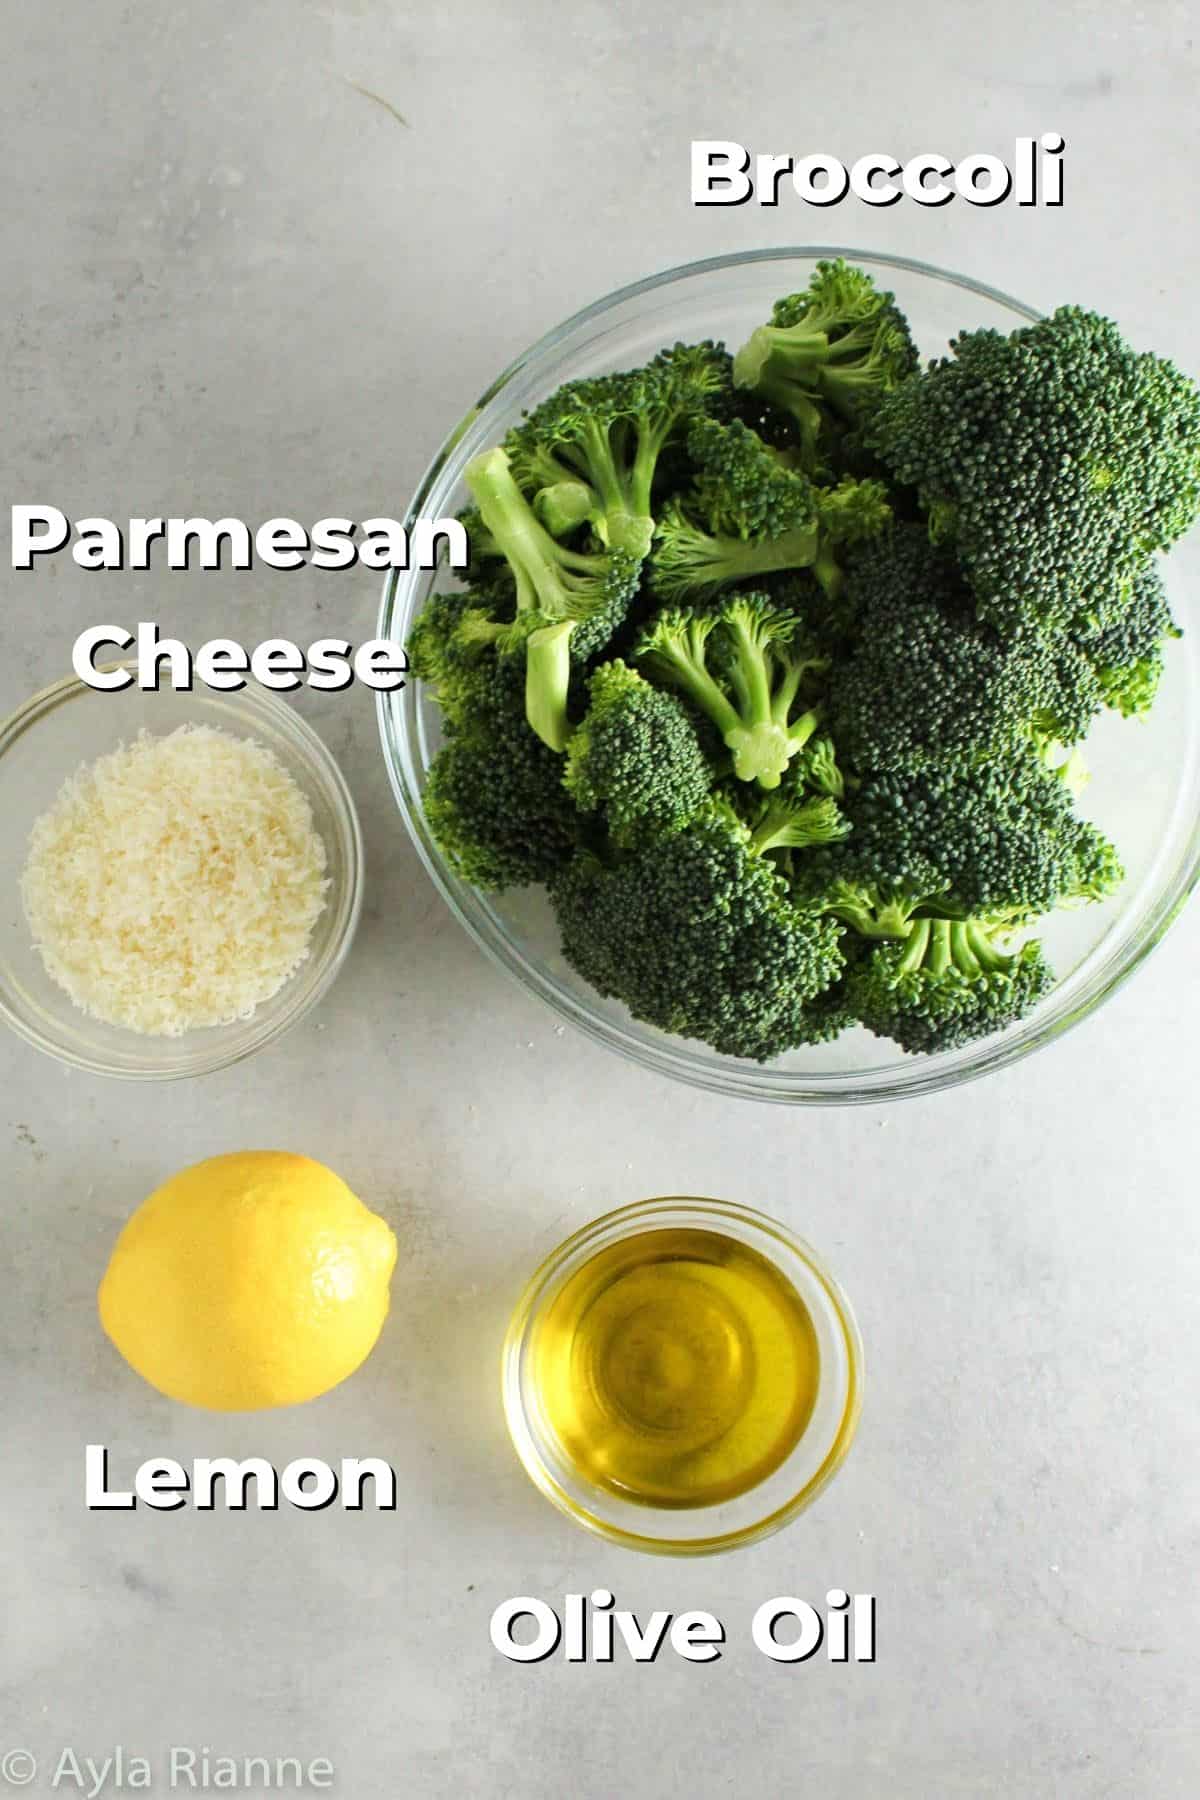 broccoli, parmesan cheese, lemon, and olive oil